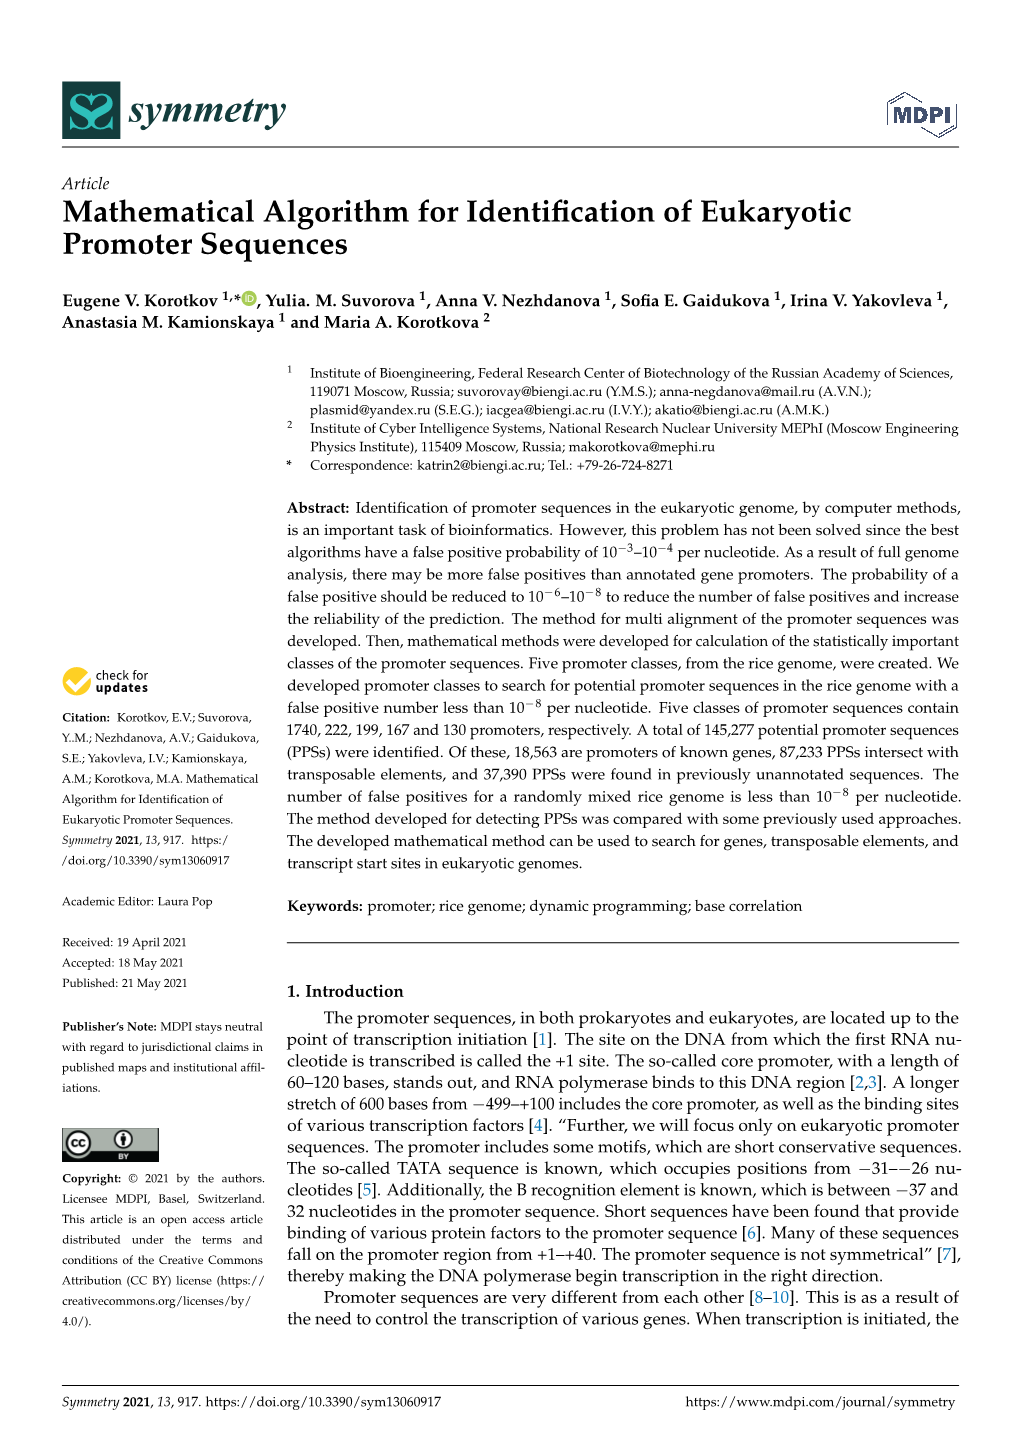 Mathematical Algorithm for Identification of Eukaryotic Promoter